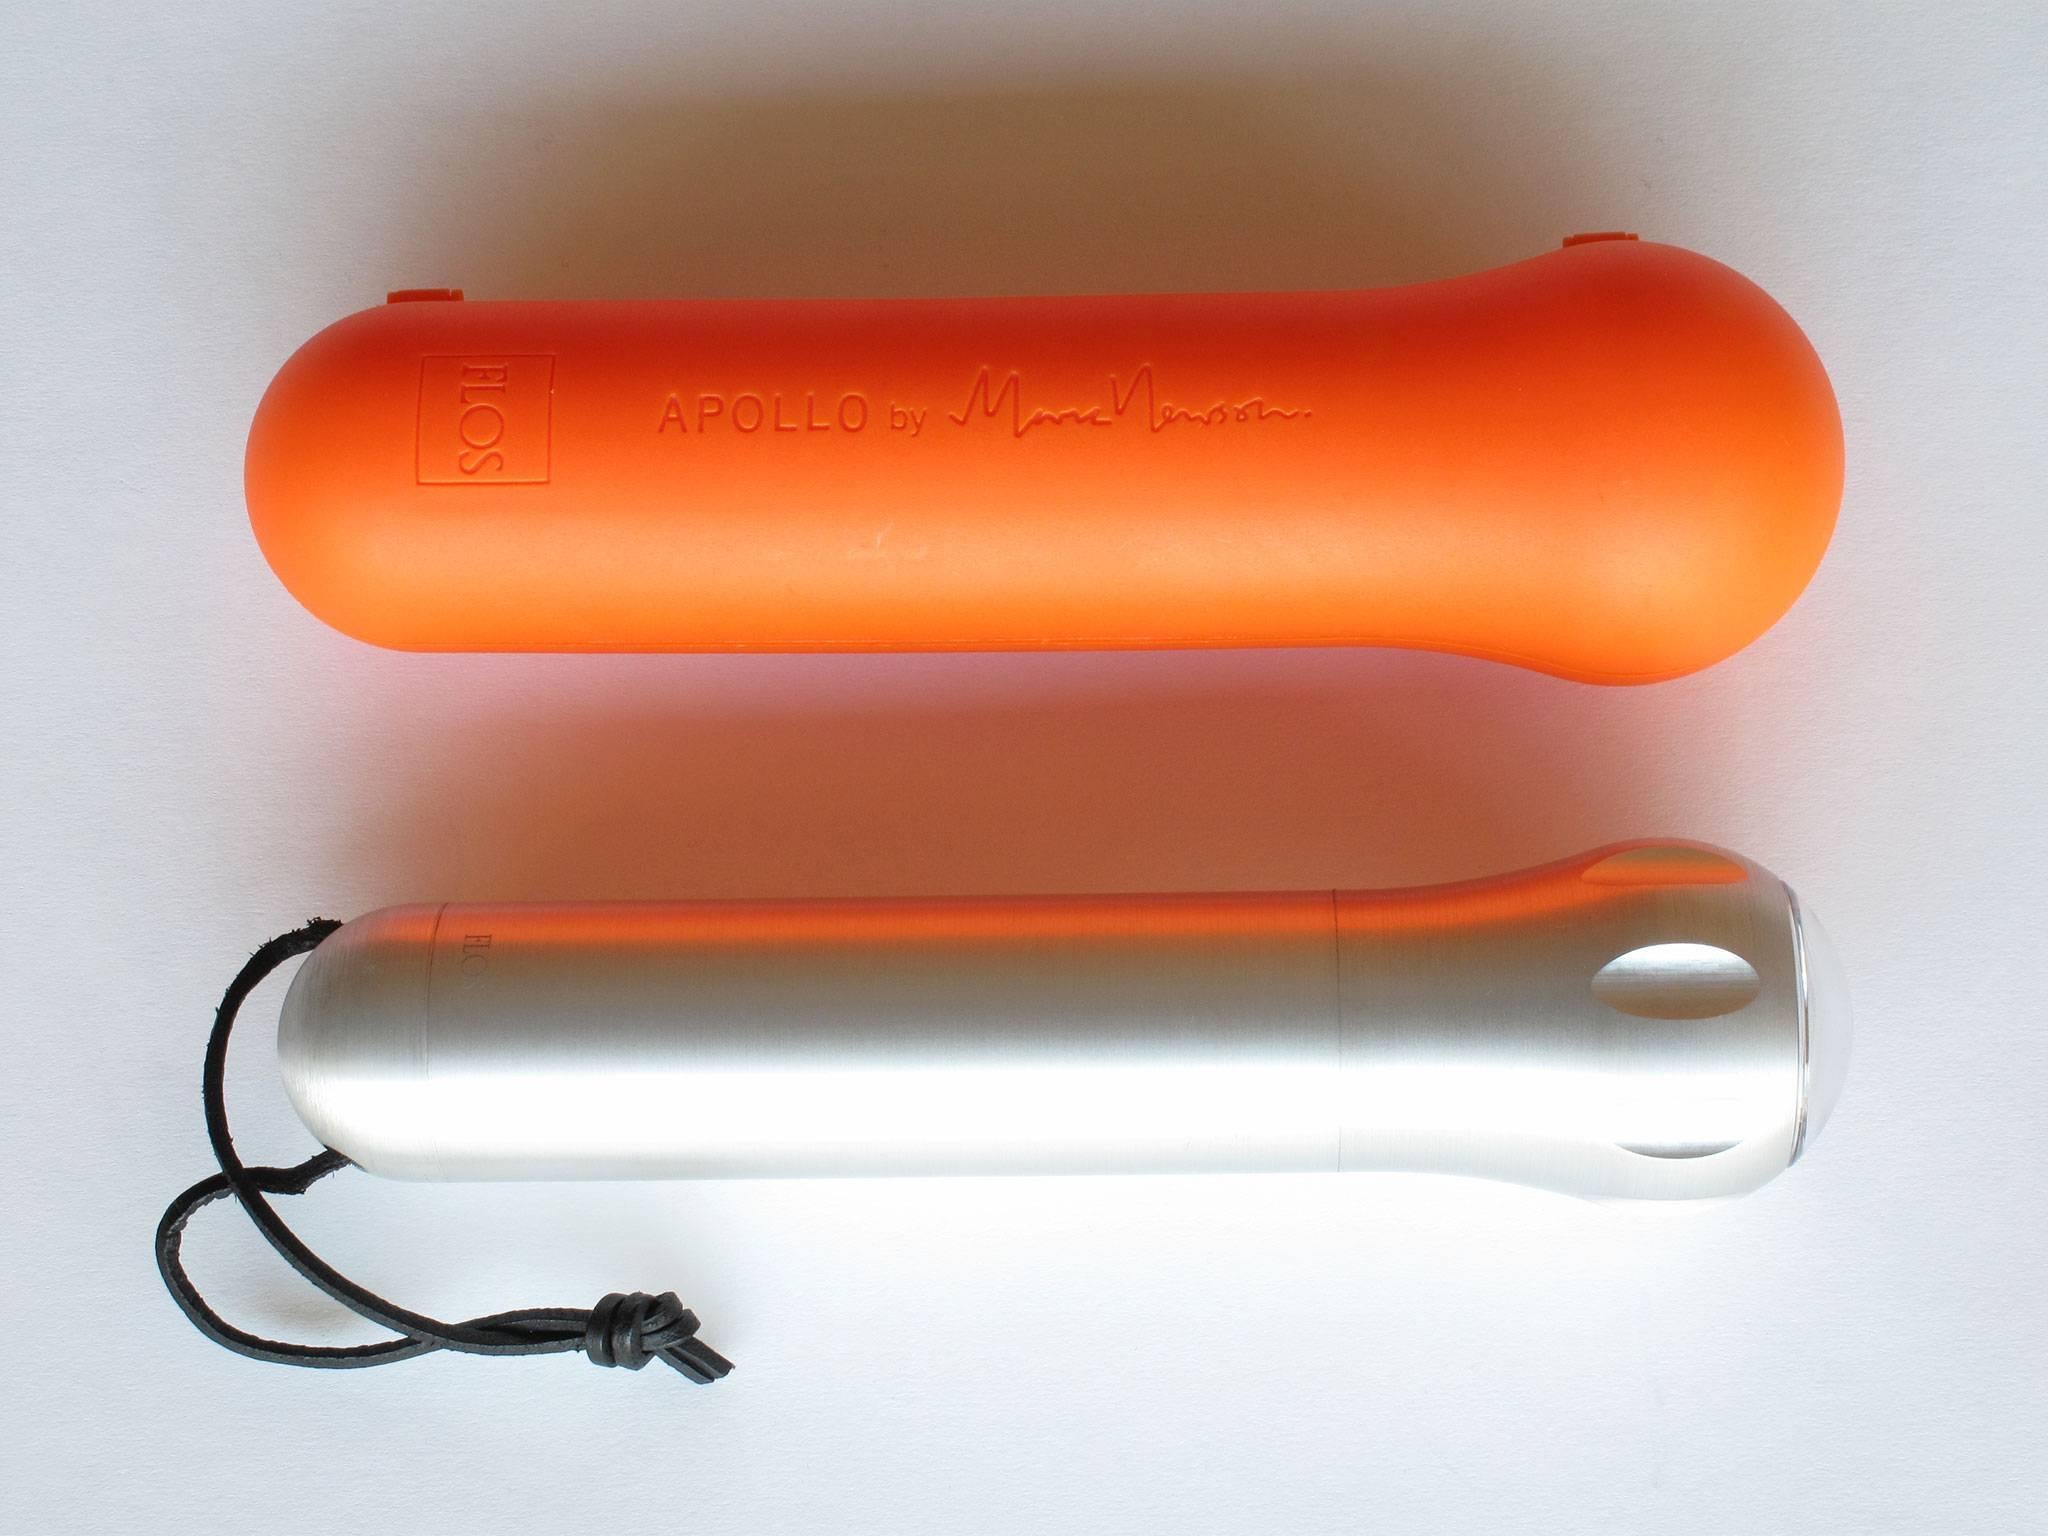 'Apollo' torch design-art object by Australian designer Marc Newson, 1997, machined from a solid lump of aluminum, engraved signature and flos logo, creates a nice beam of light, uses two size D-batteries. Flashlight measures 9.25 in. long x 1.75